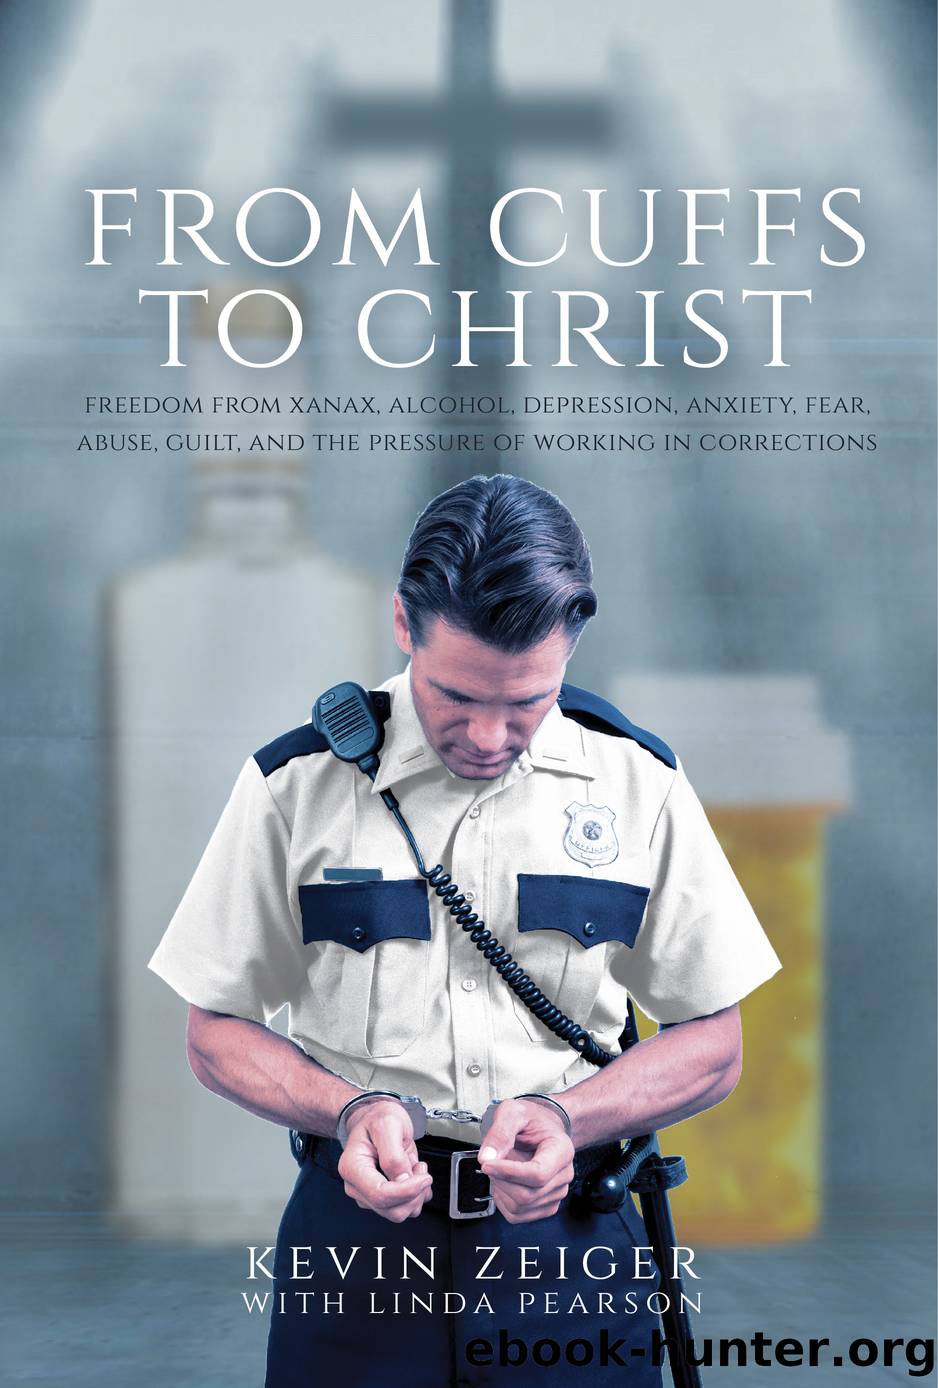 From Cuffs to Christ by Kevin Zeiger